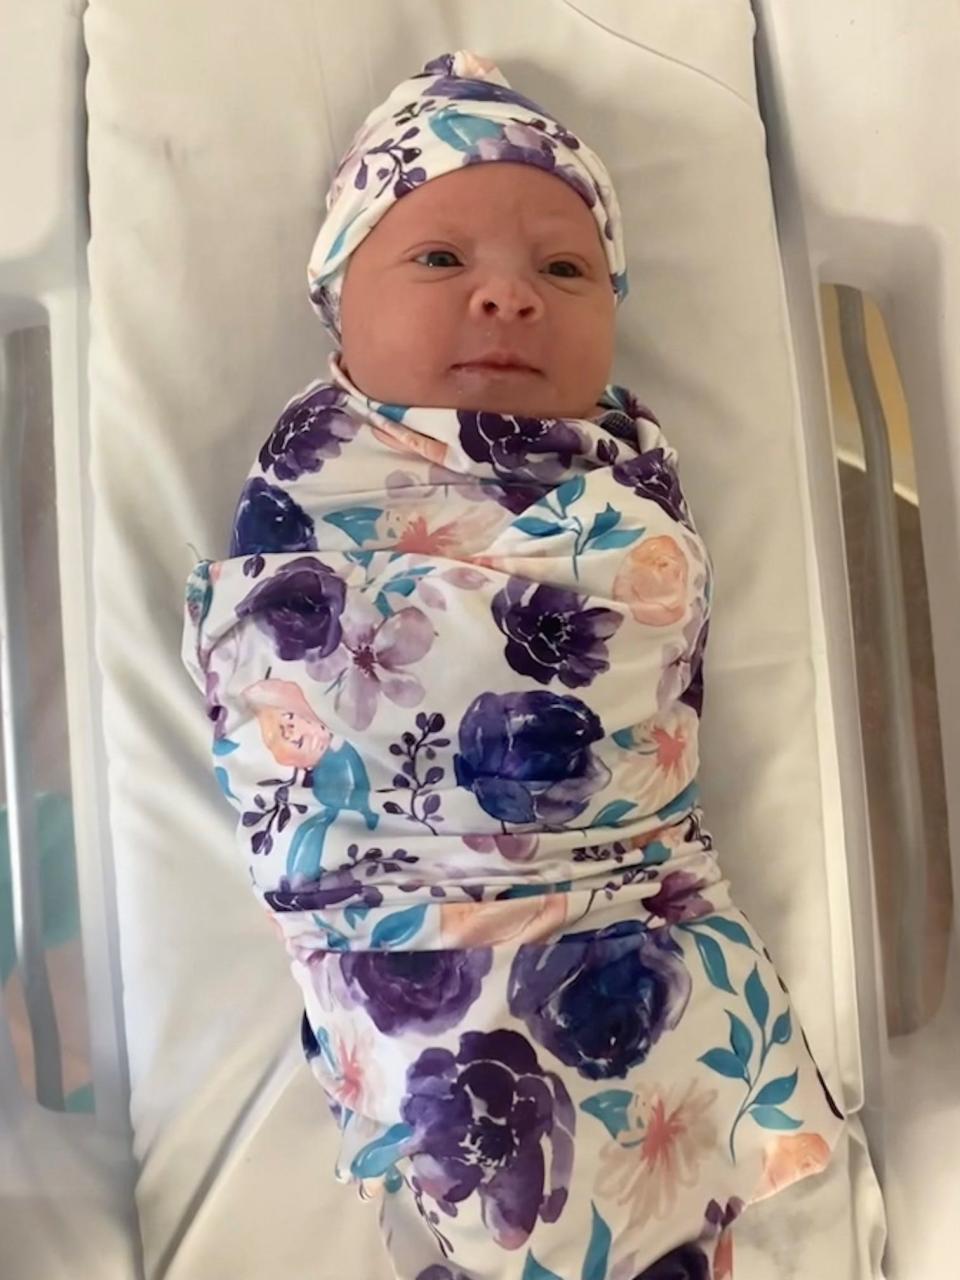 BSA welcomes the first baby of 2023, Ren Thompson, born Jan. 1 at 1:04 a.m. to parents Tabitha and Russell Thompson at BSA hospital.